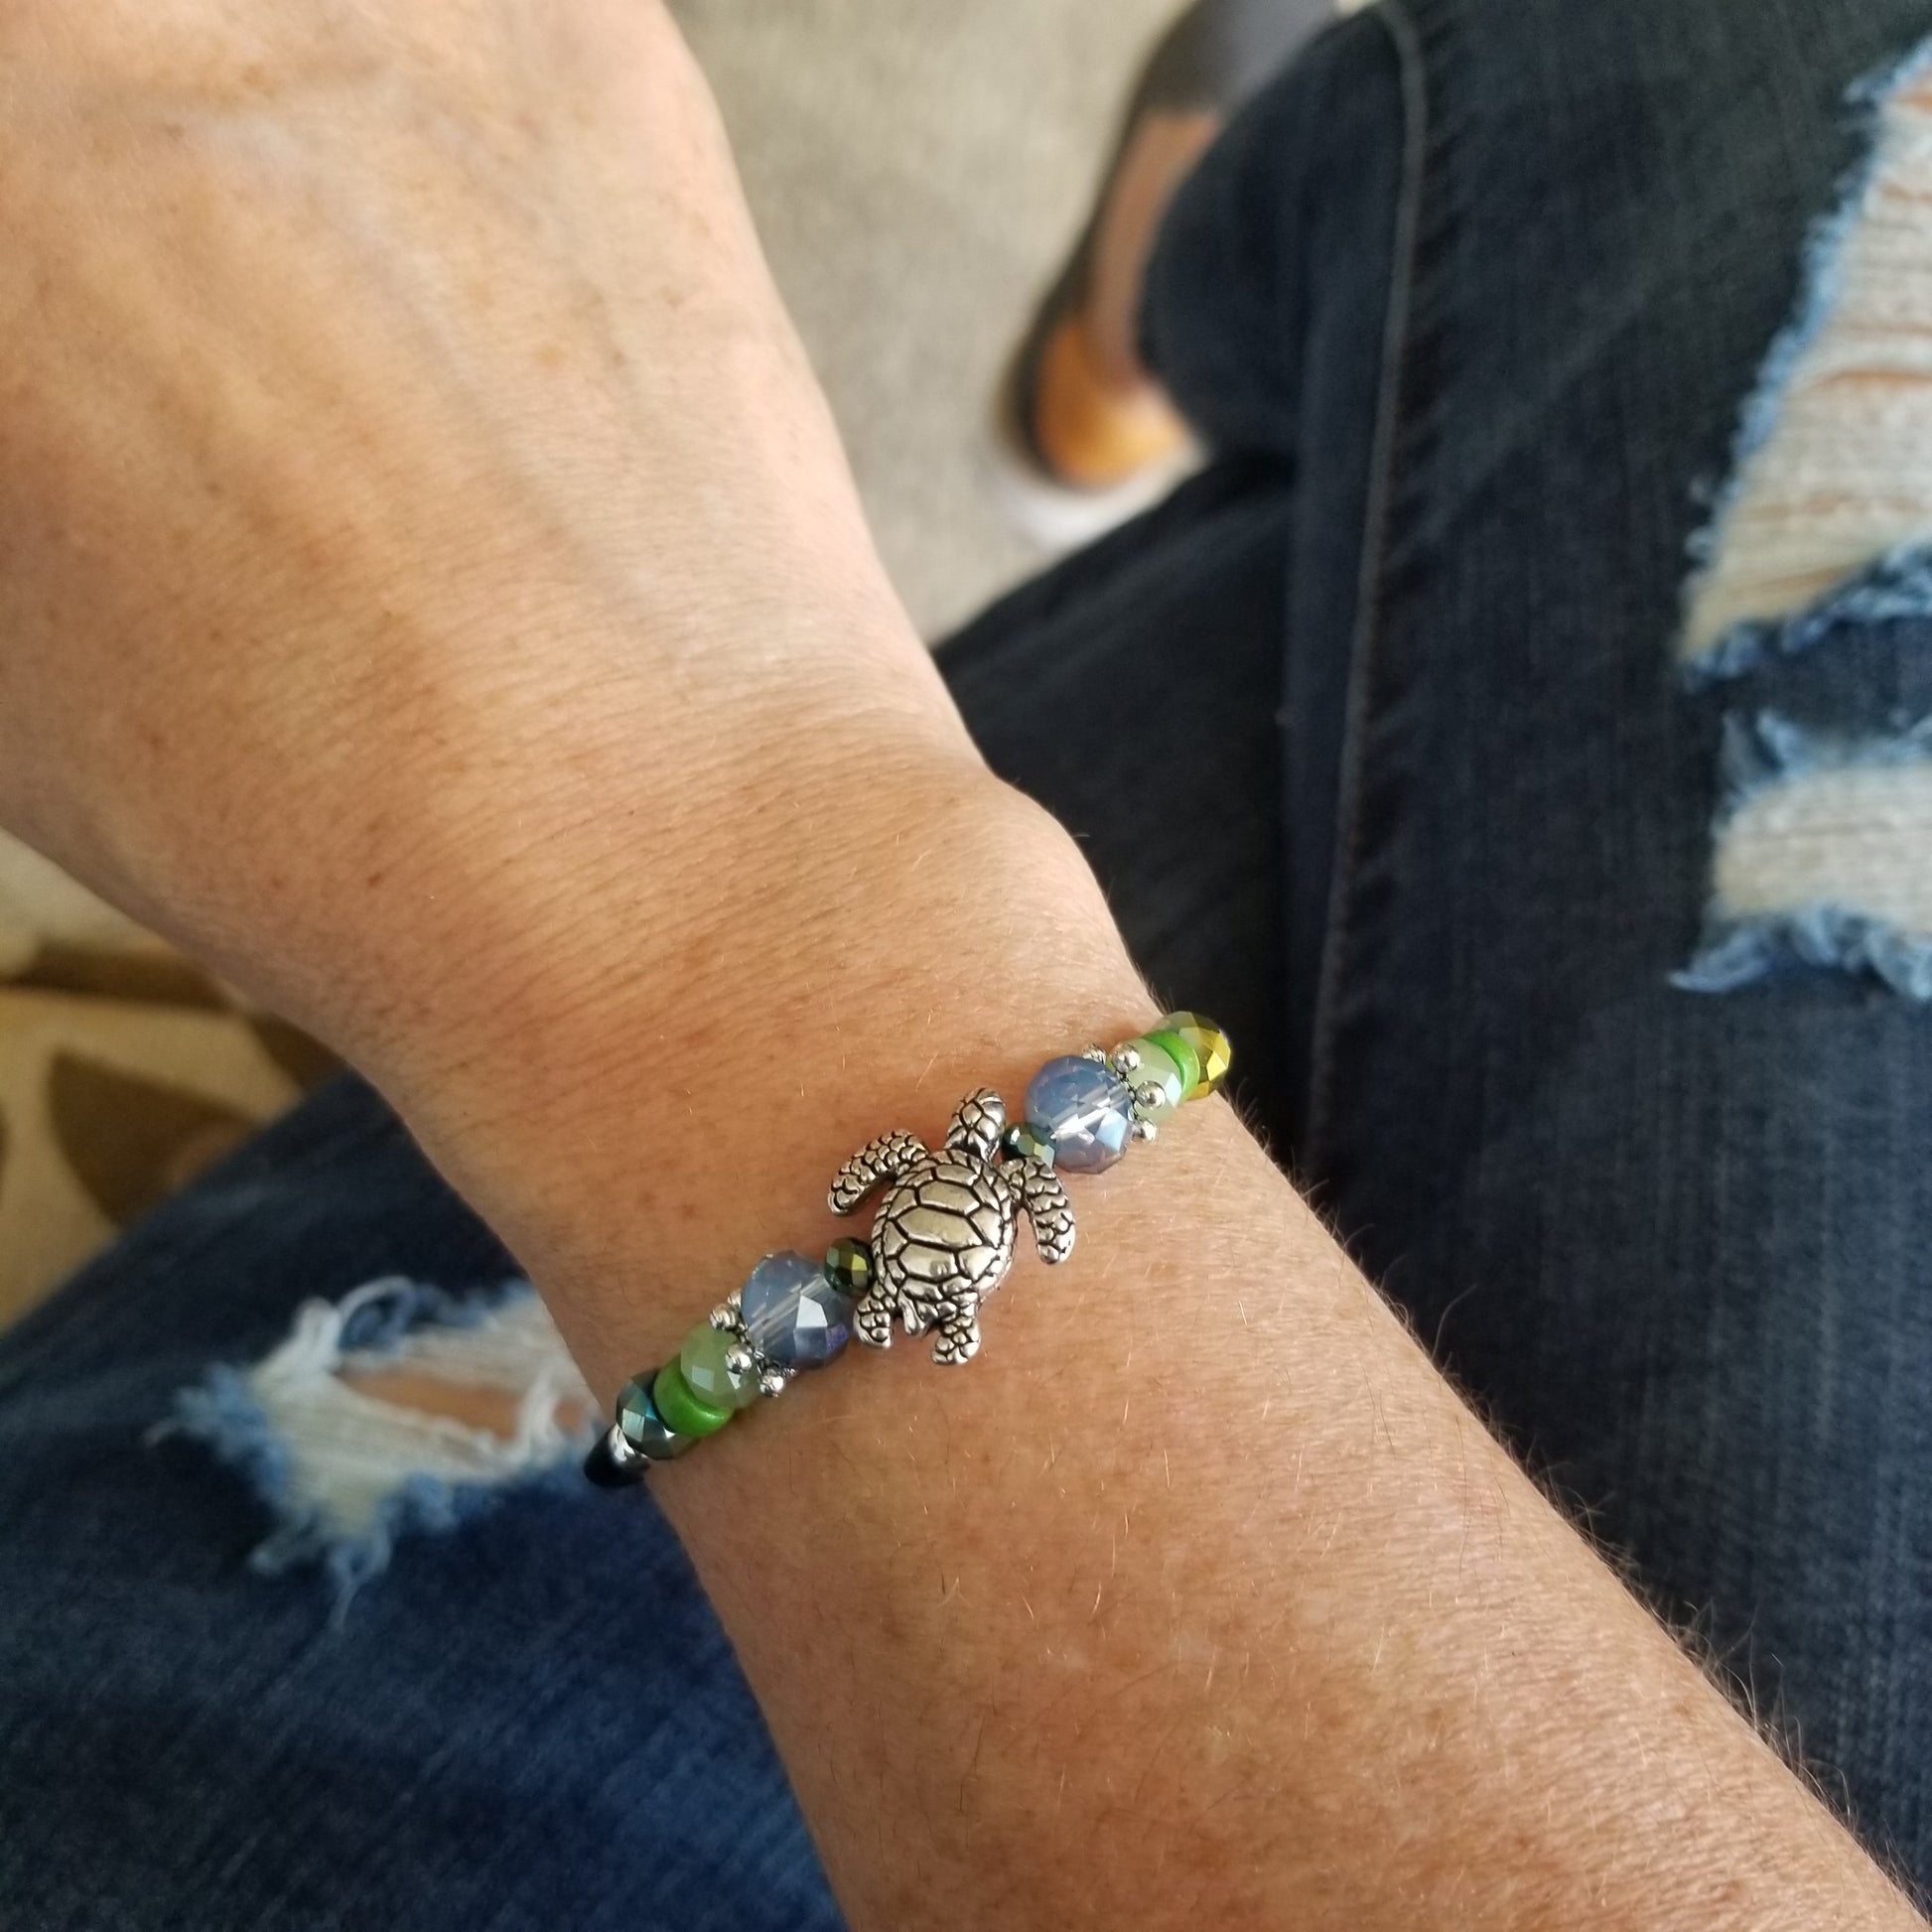 silver sea turtle charm and coordinating theme beads wrap bracelet on wrist